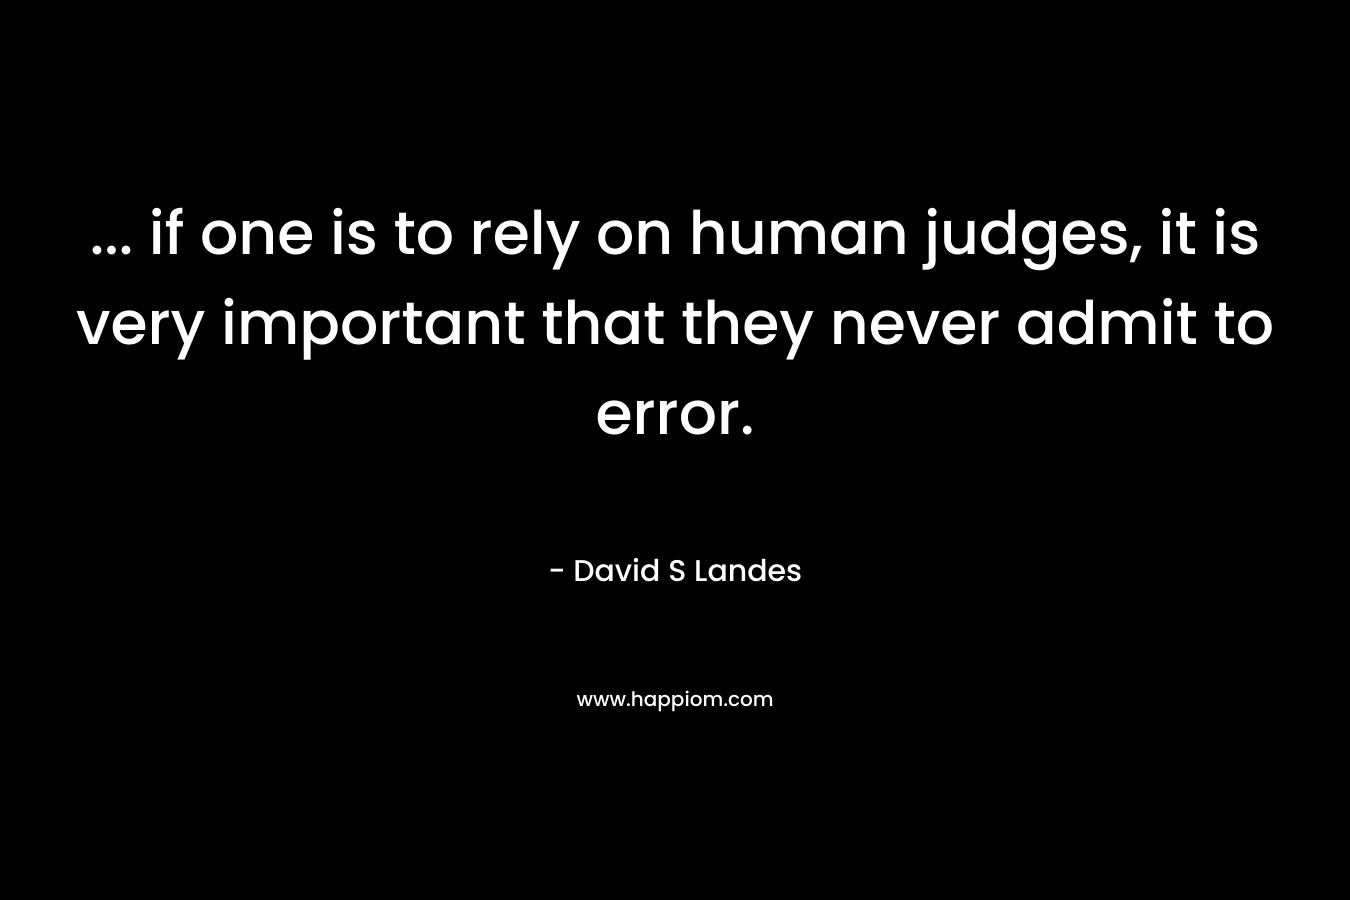 ... if one is to rely on human judges, it is very important that they never admit to error.